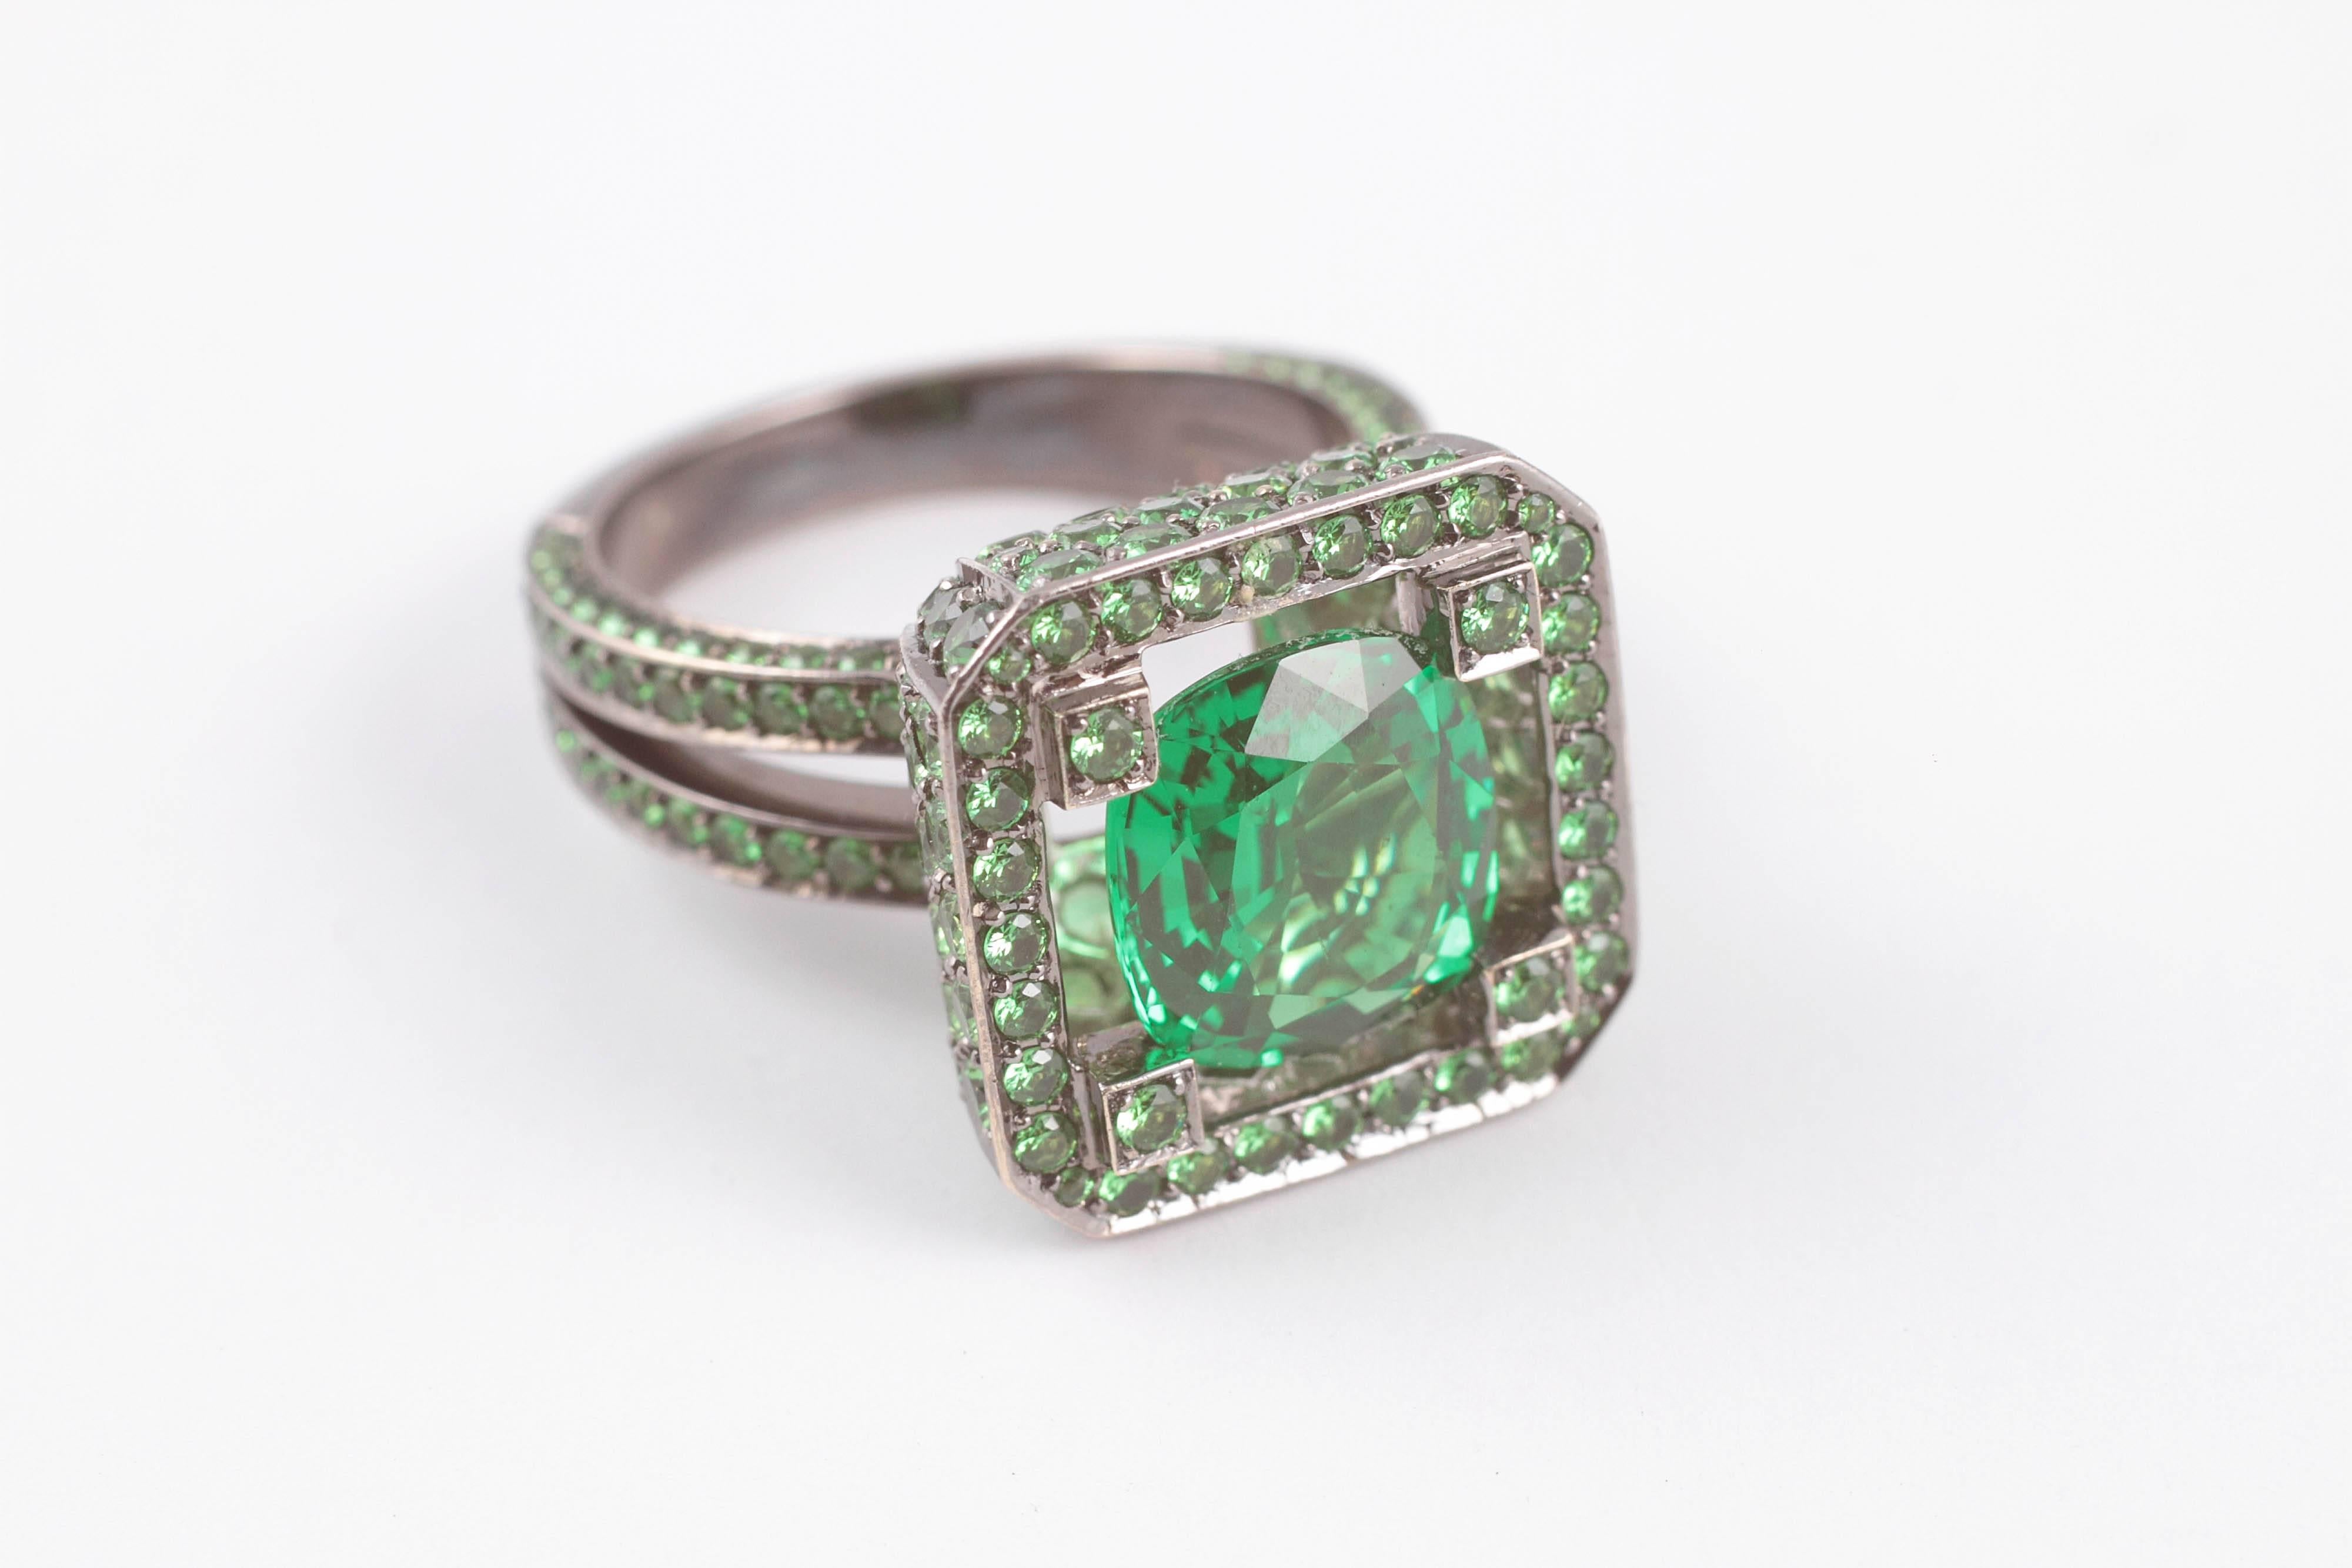 A beautiful, bright green garnet is nested in the middle of more of the same.  For those of you born in January who don't think you have a pretty birthstone, Think again.  This London based designer is making a statement for anyone wants to wear the